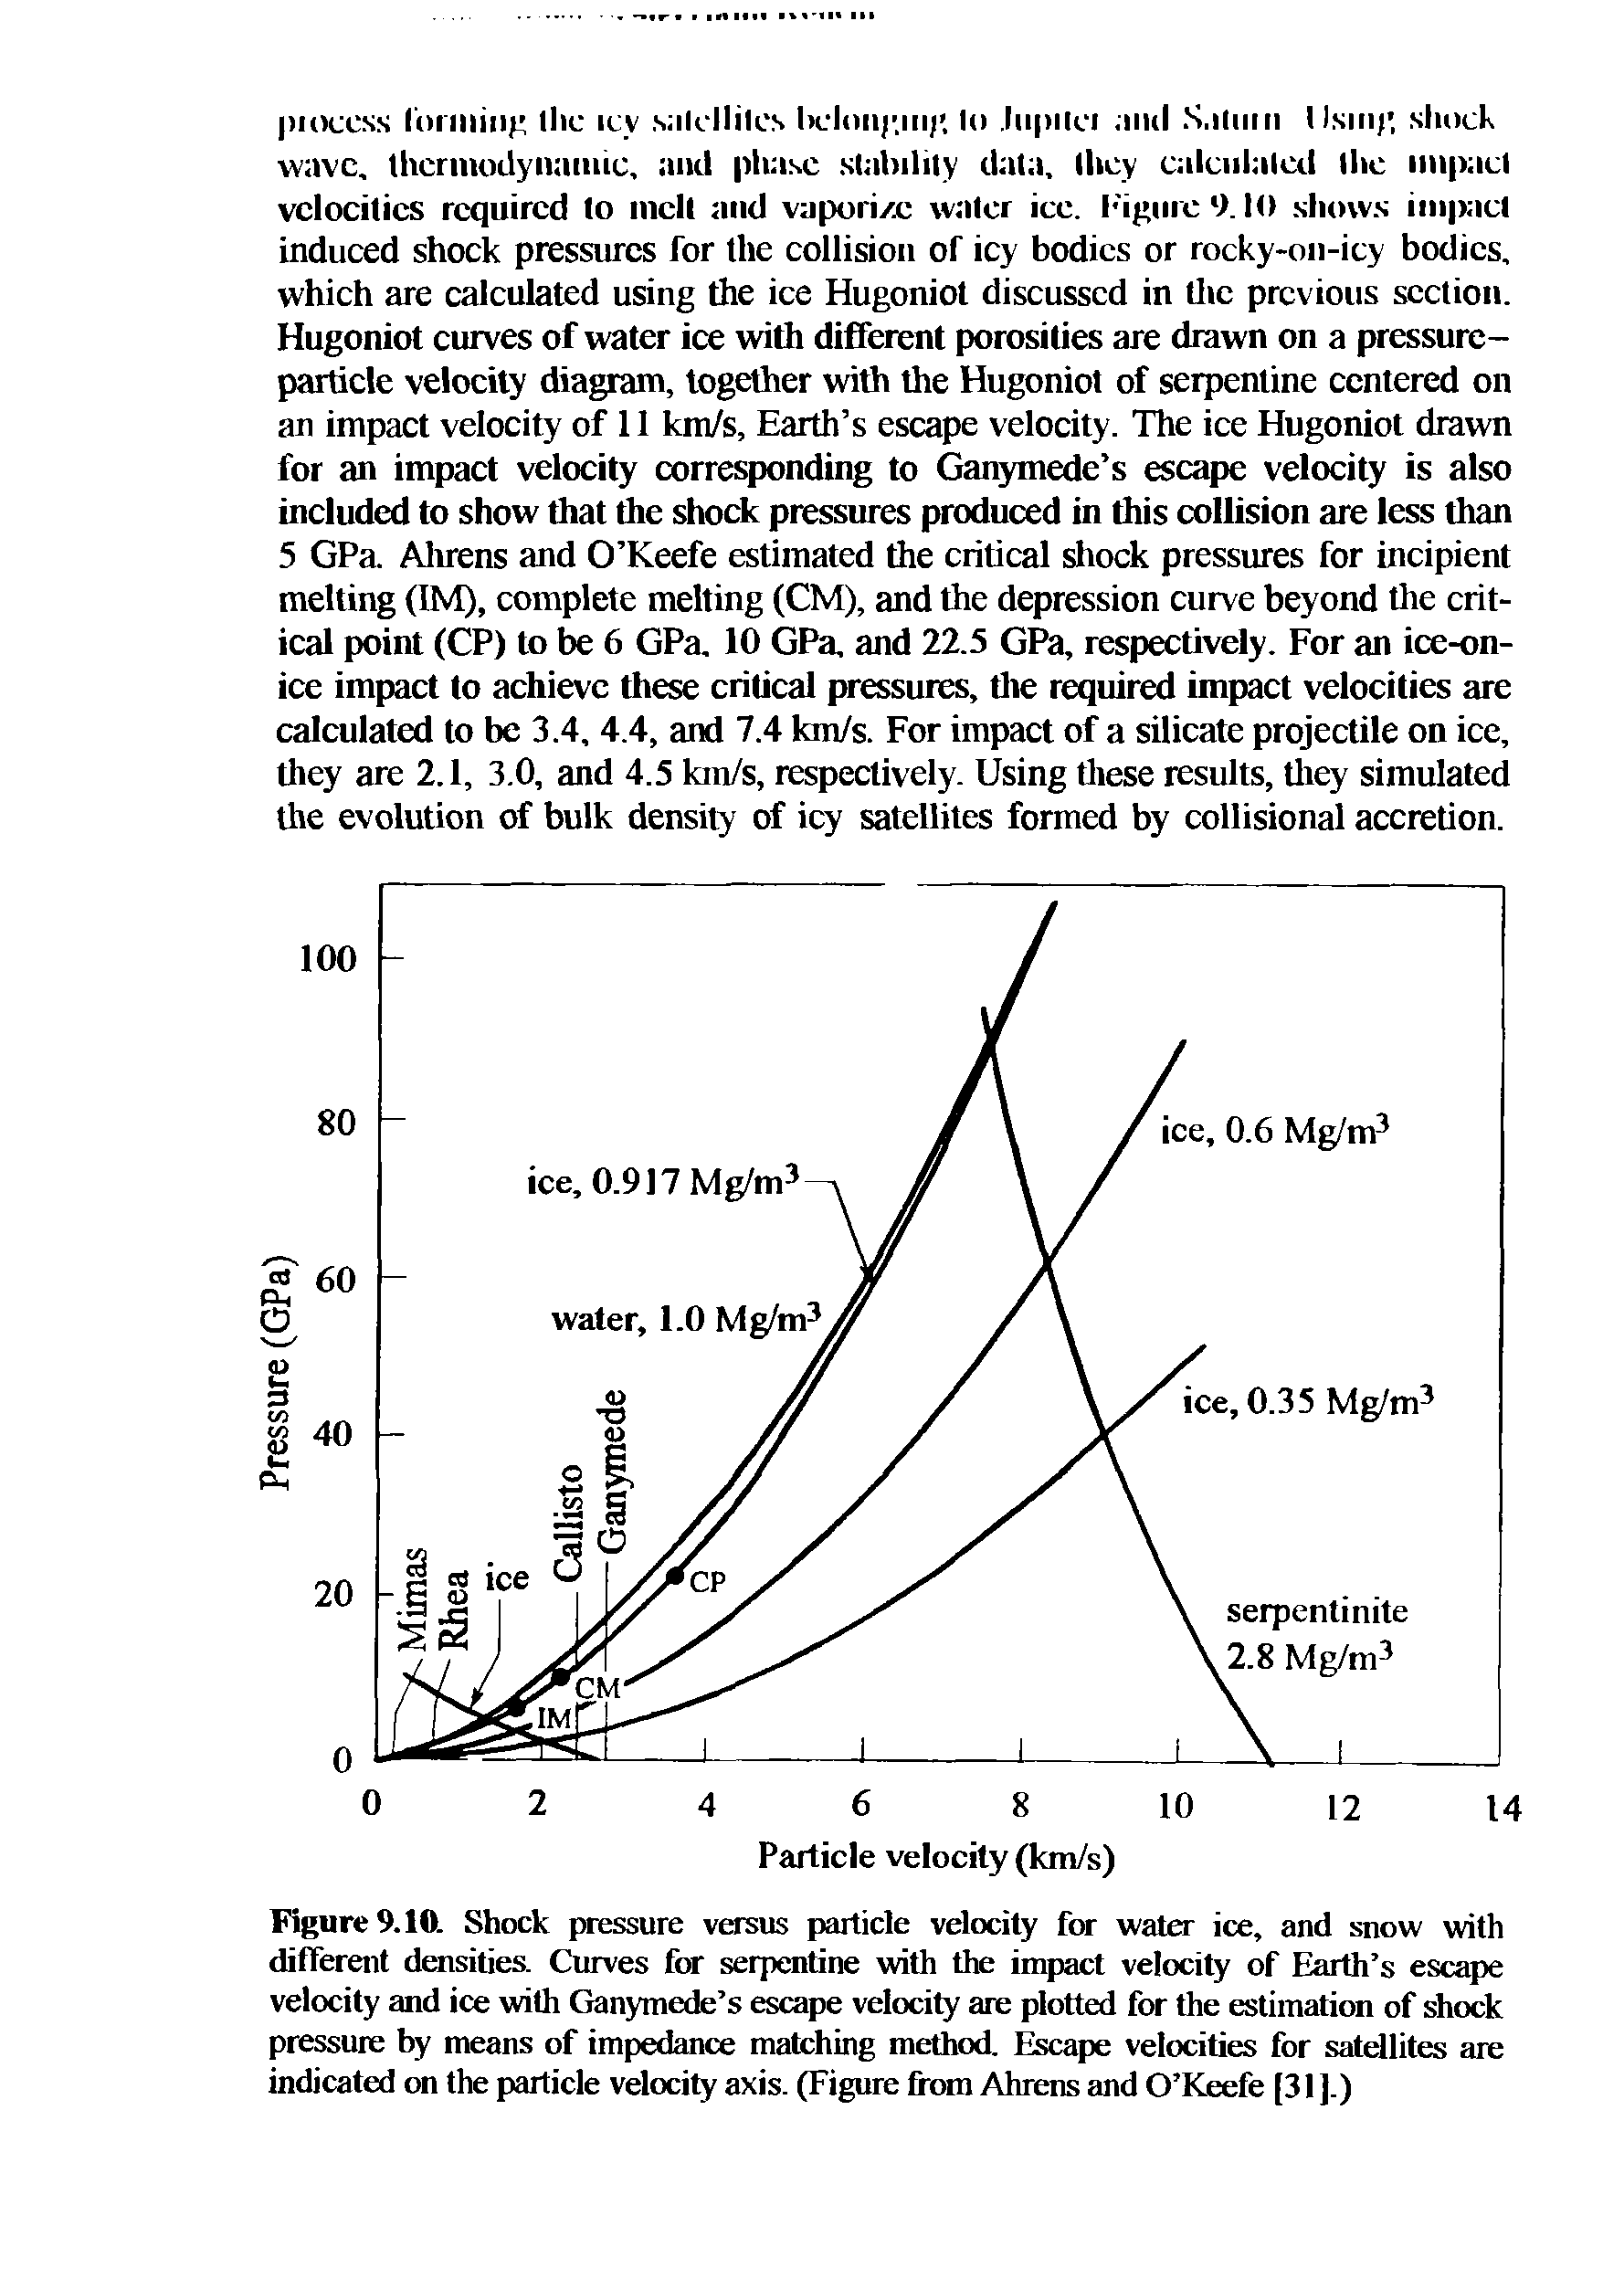 Figure 9.10. Shock pressure versus particle velocity for water ice, and snow with different densities. Curves for serpentine with the impact velocity of Earth s escape velocity and ice with Ganymede s escape velocity are plotted for the estimation of shock pressure by means of impedance matching method. Escape velocities for satellites are indicated on the particle velocity axis. (Figure from /Vhrens and O Keefe [31].)...